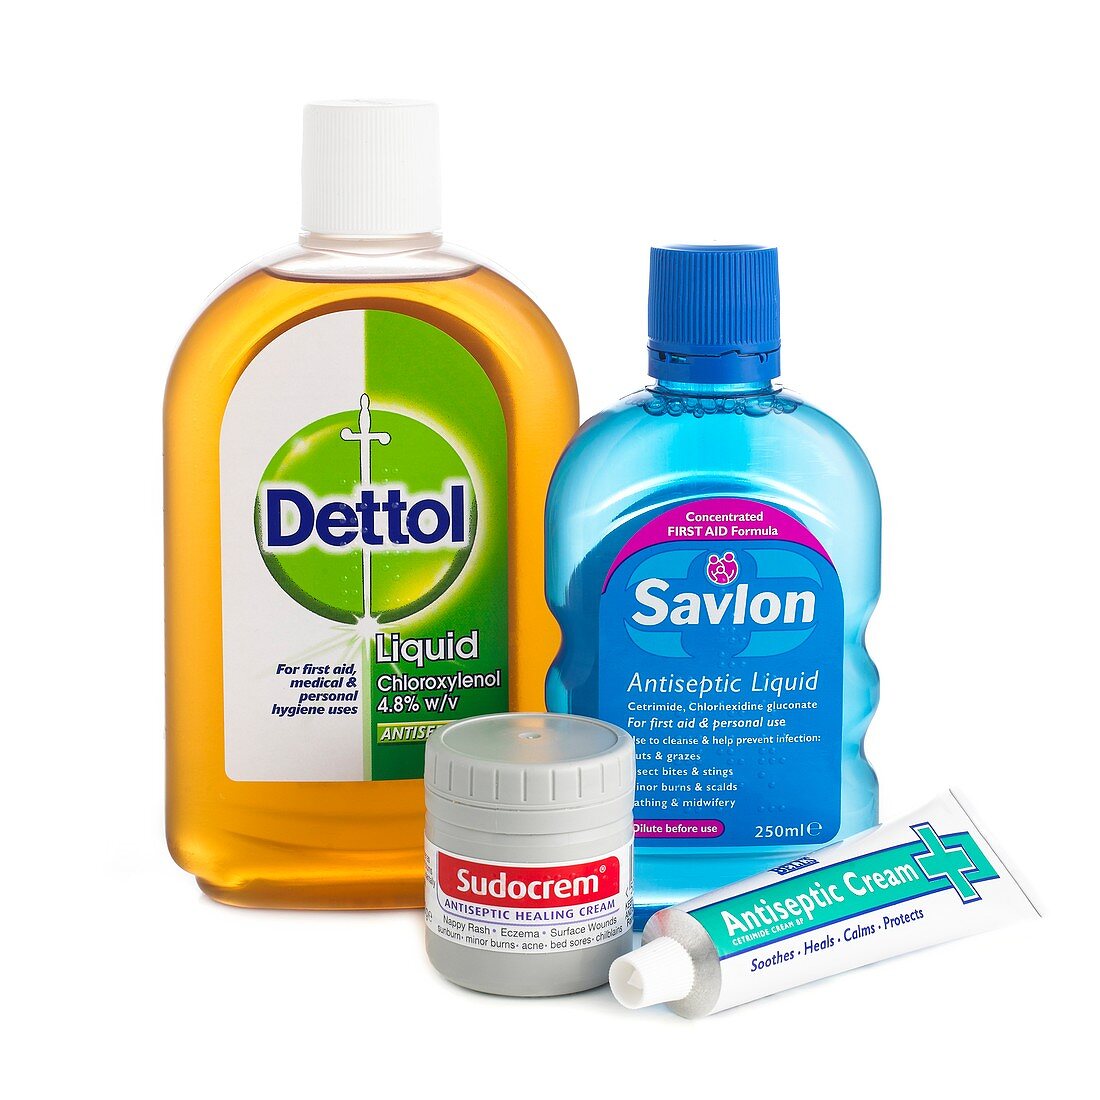 Domestic antiseptic products